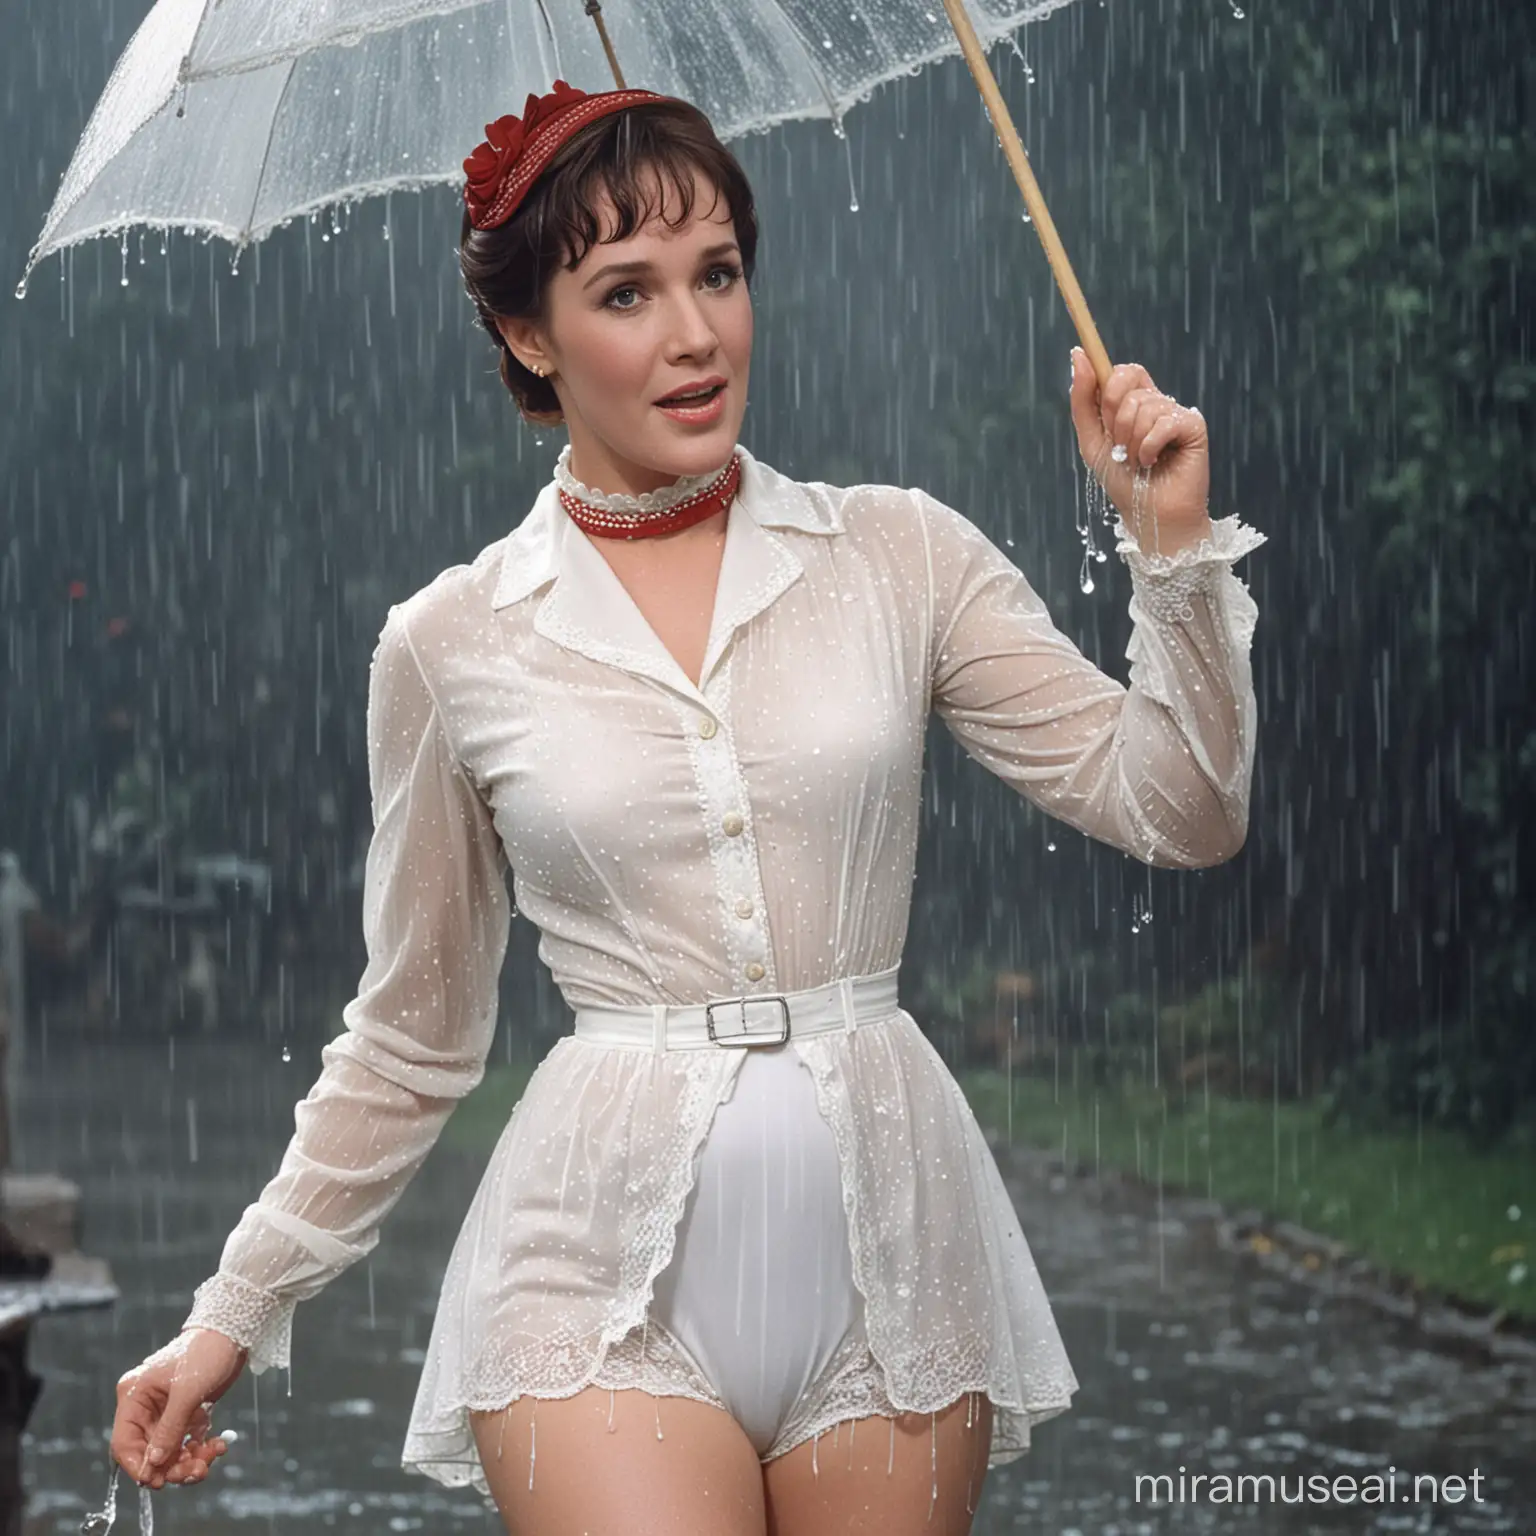 Julie Andrews as Mary Poppins in the Rain Wearing Wet White Lacy Panties